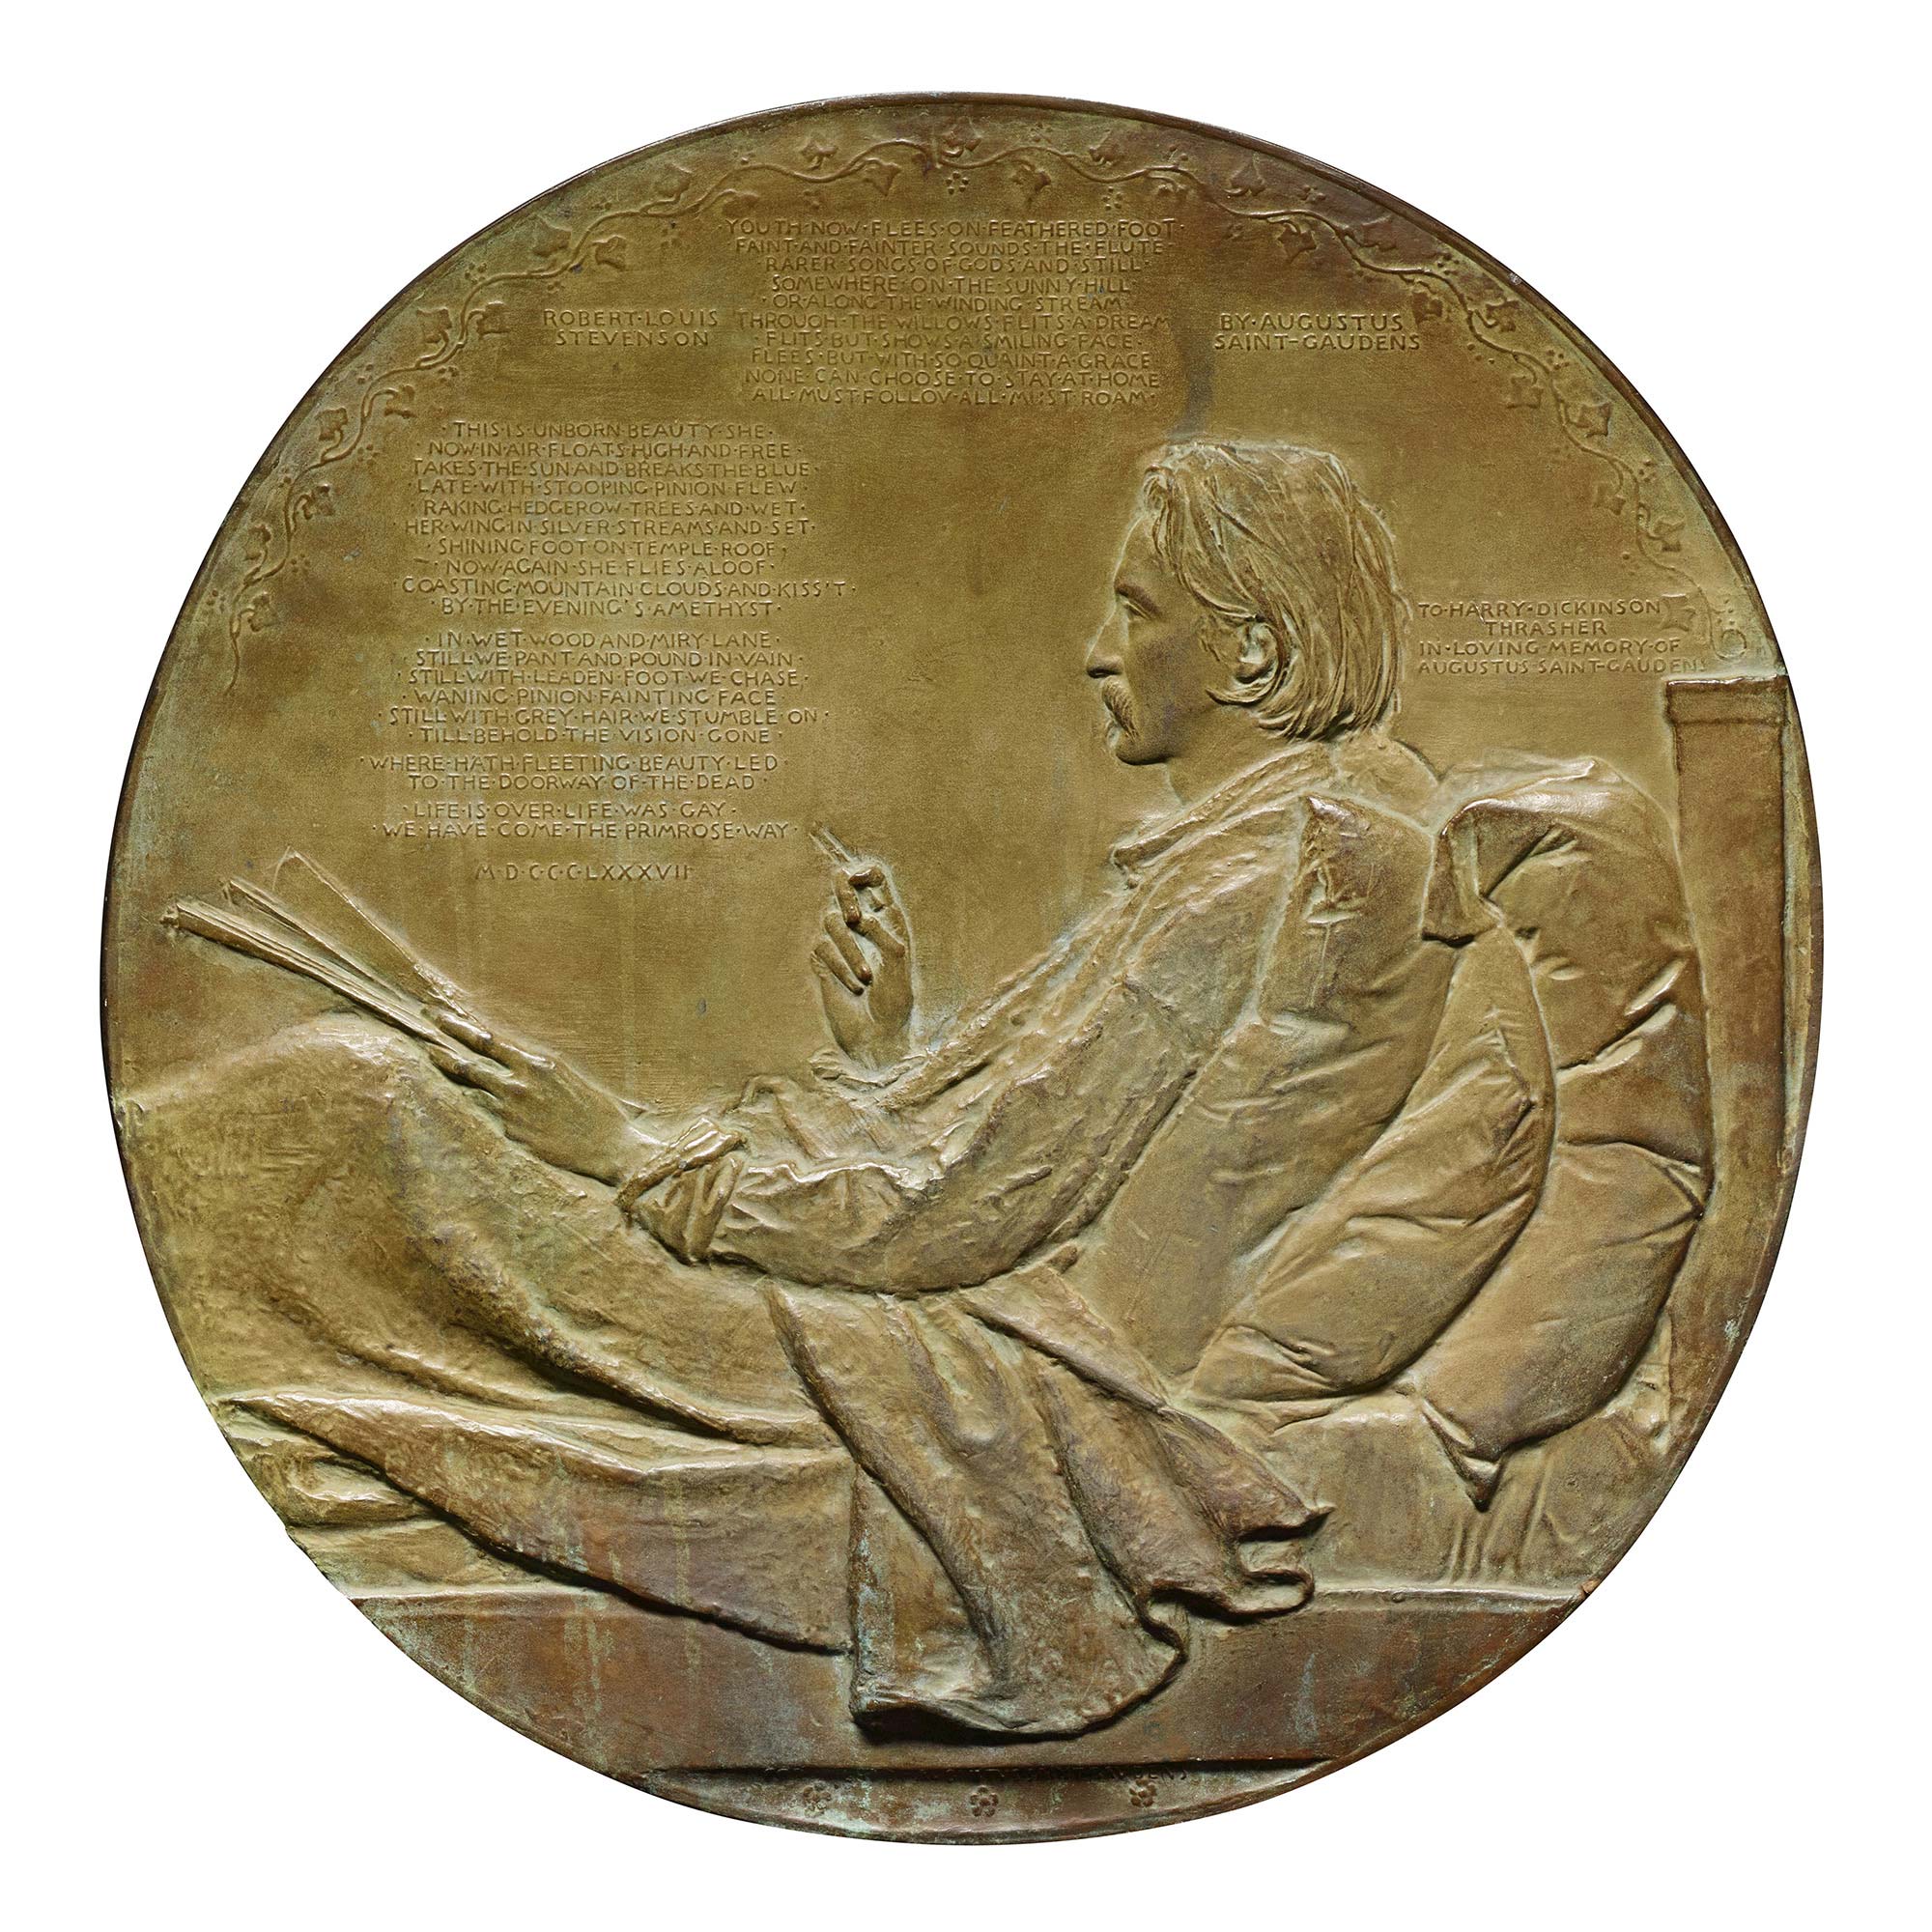 Bronze medal of a man reclining in bed against pillows and with a blanket on his lap, sheets of paper in his left hand and a cigarette in his right